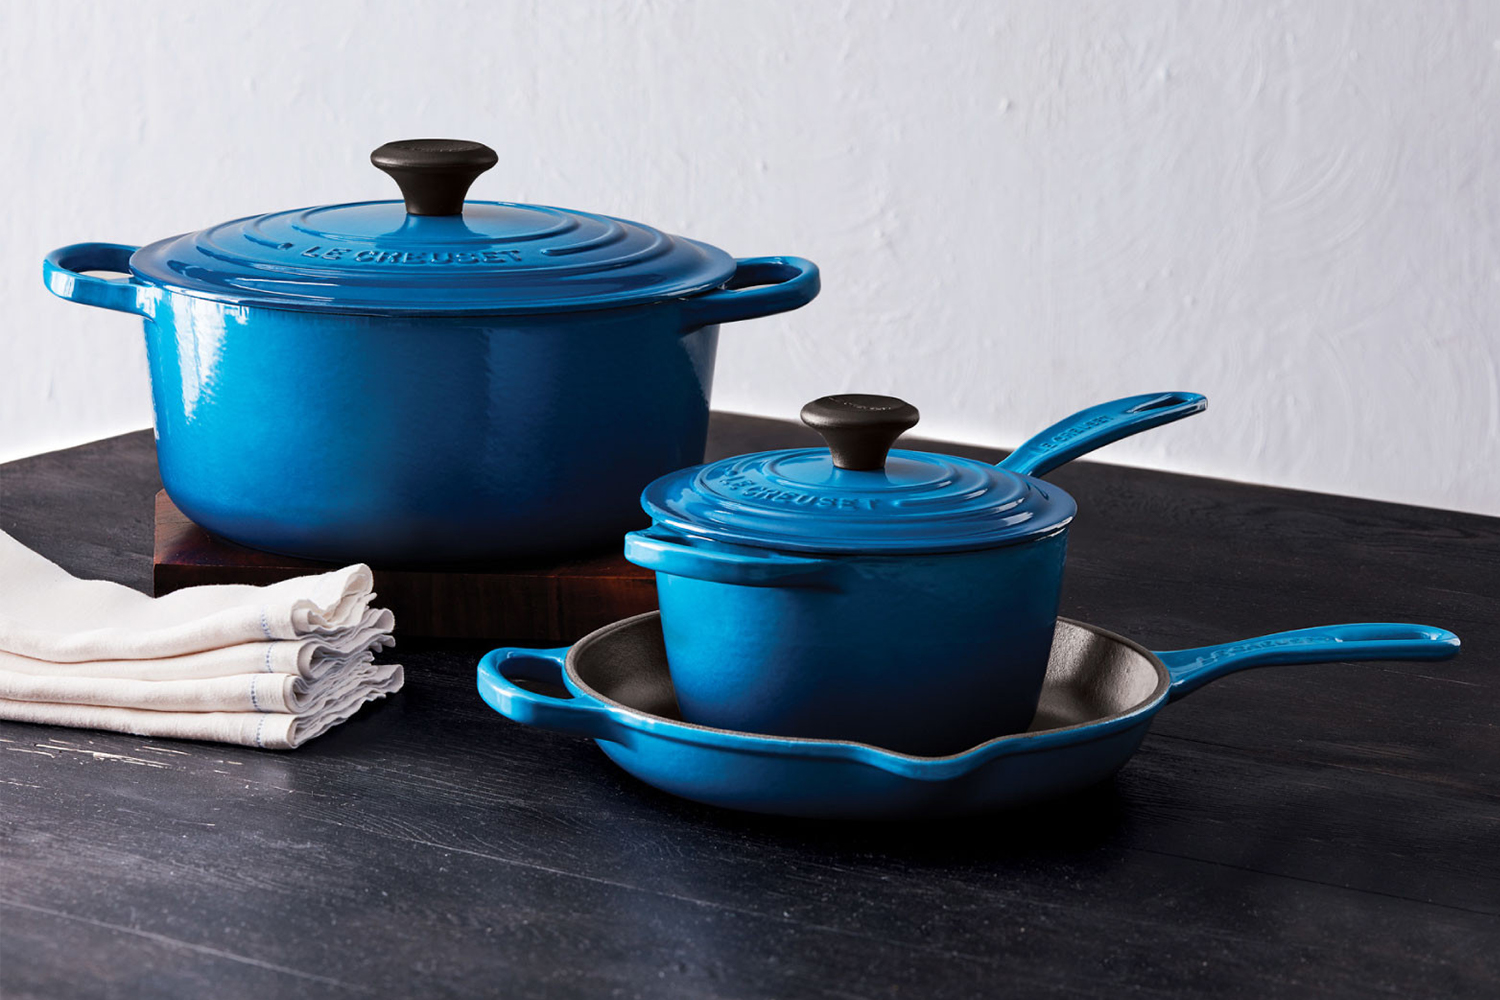 Le Creuset Cookware Is on Sale at Nordstrom Rack for Up to 50% Off